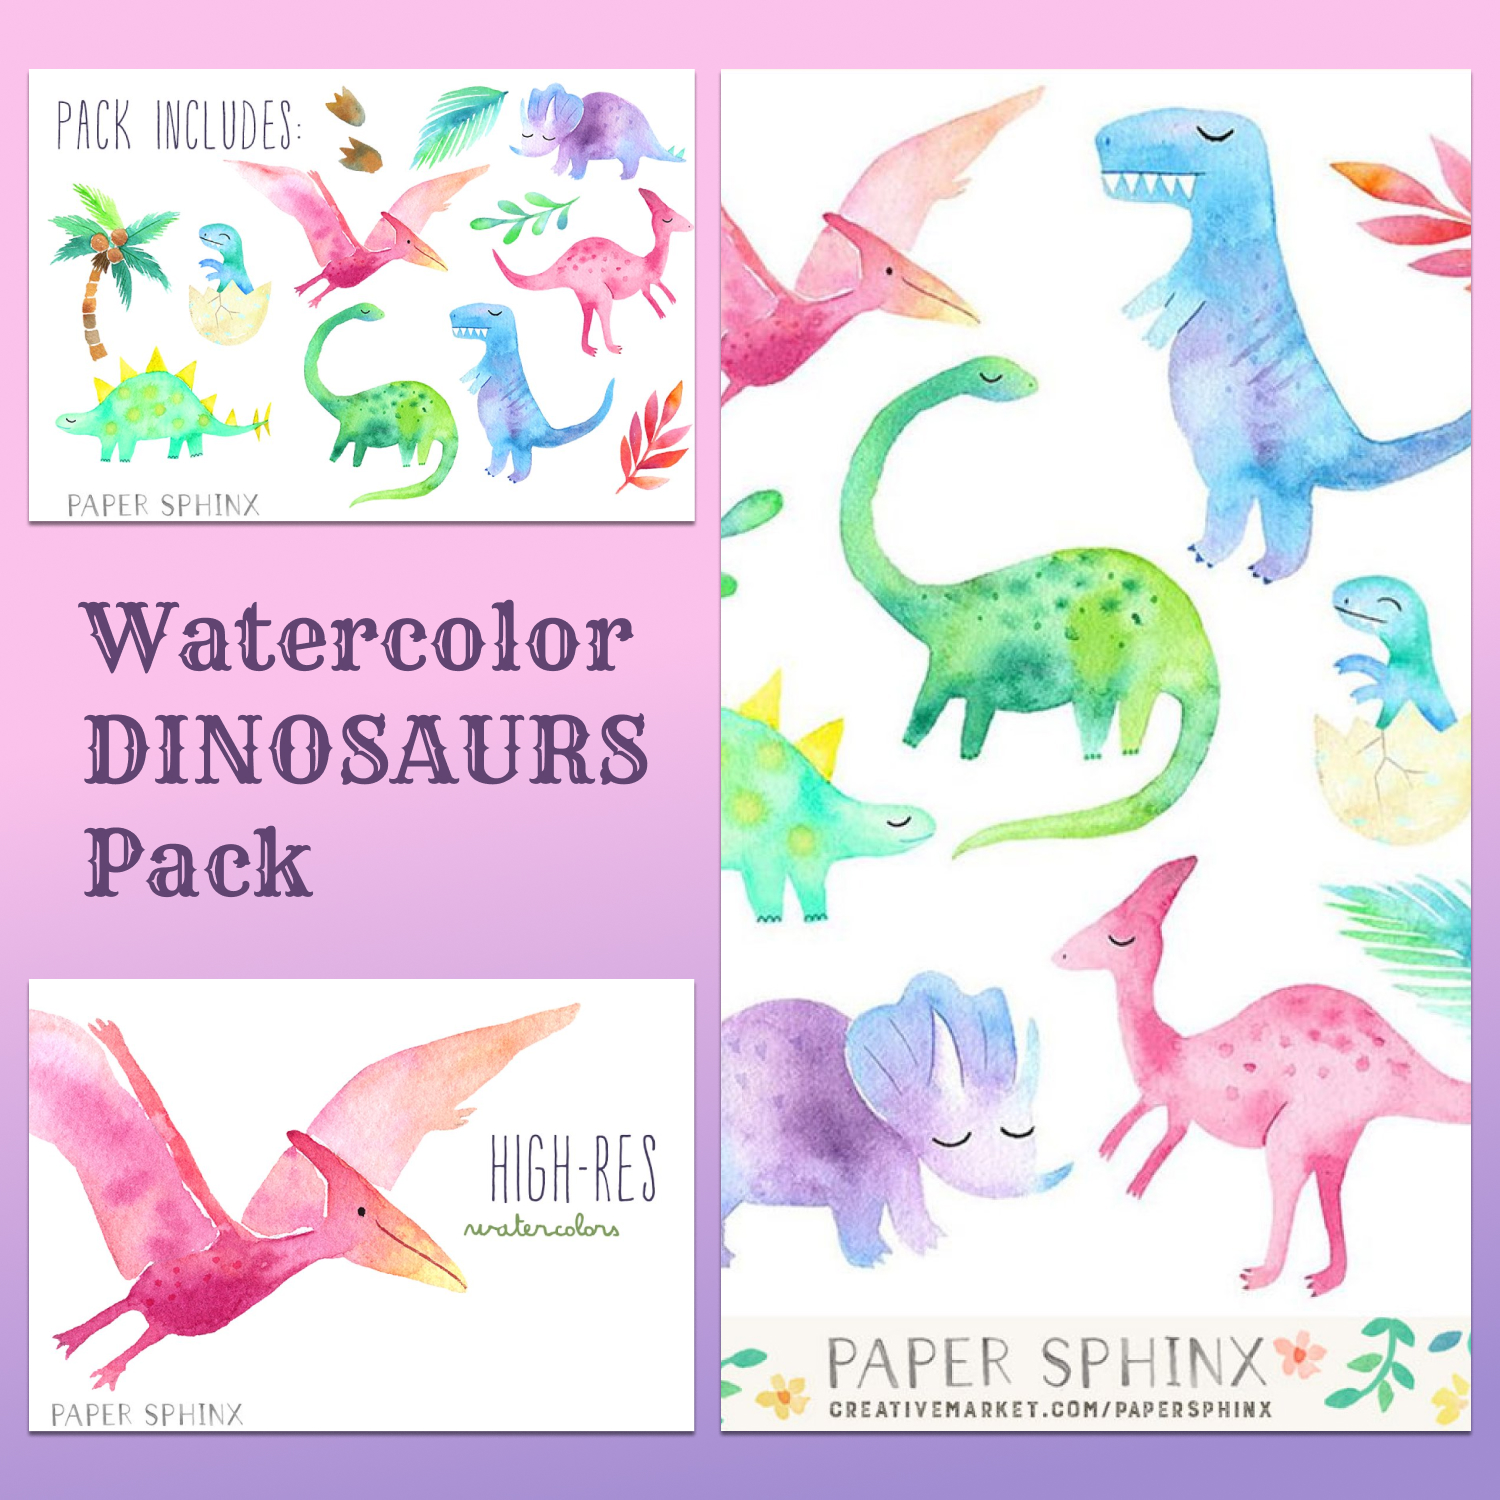 Watercolor Dinosaurs Hand Painted Graphics Pack cover image.